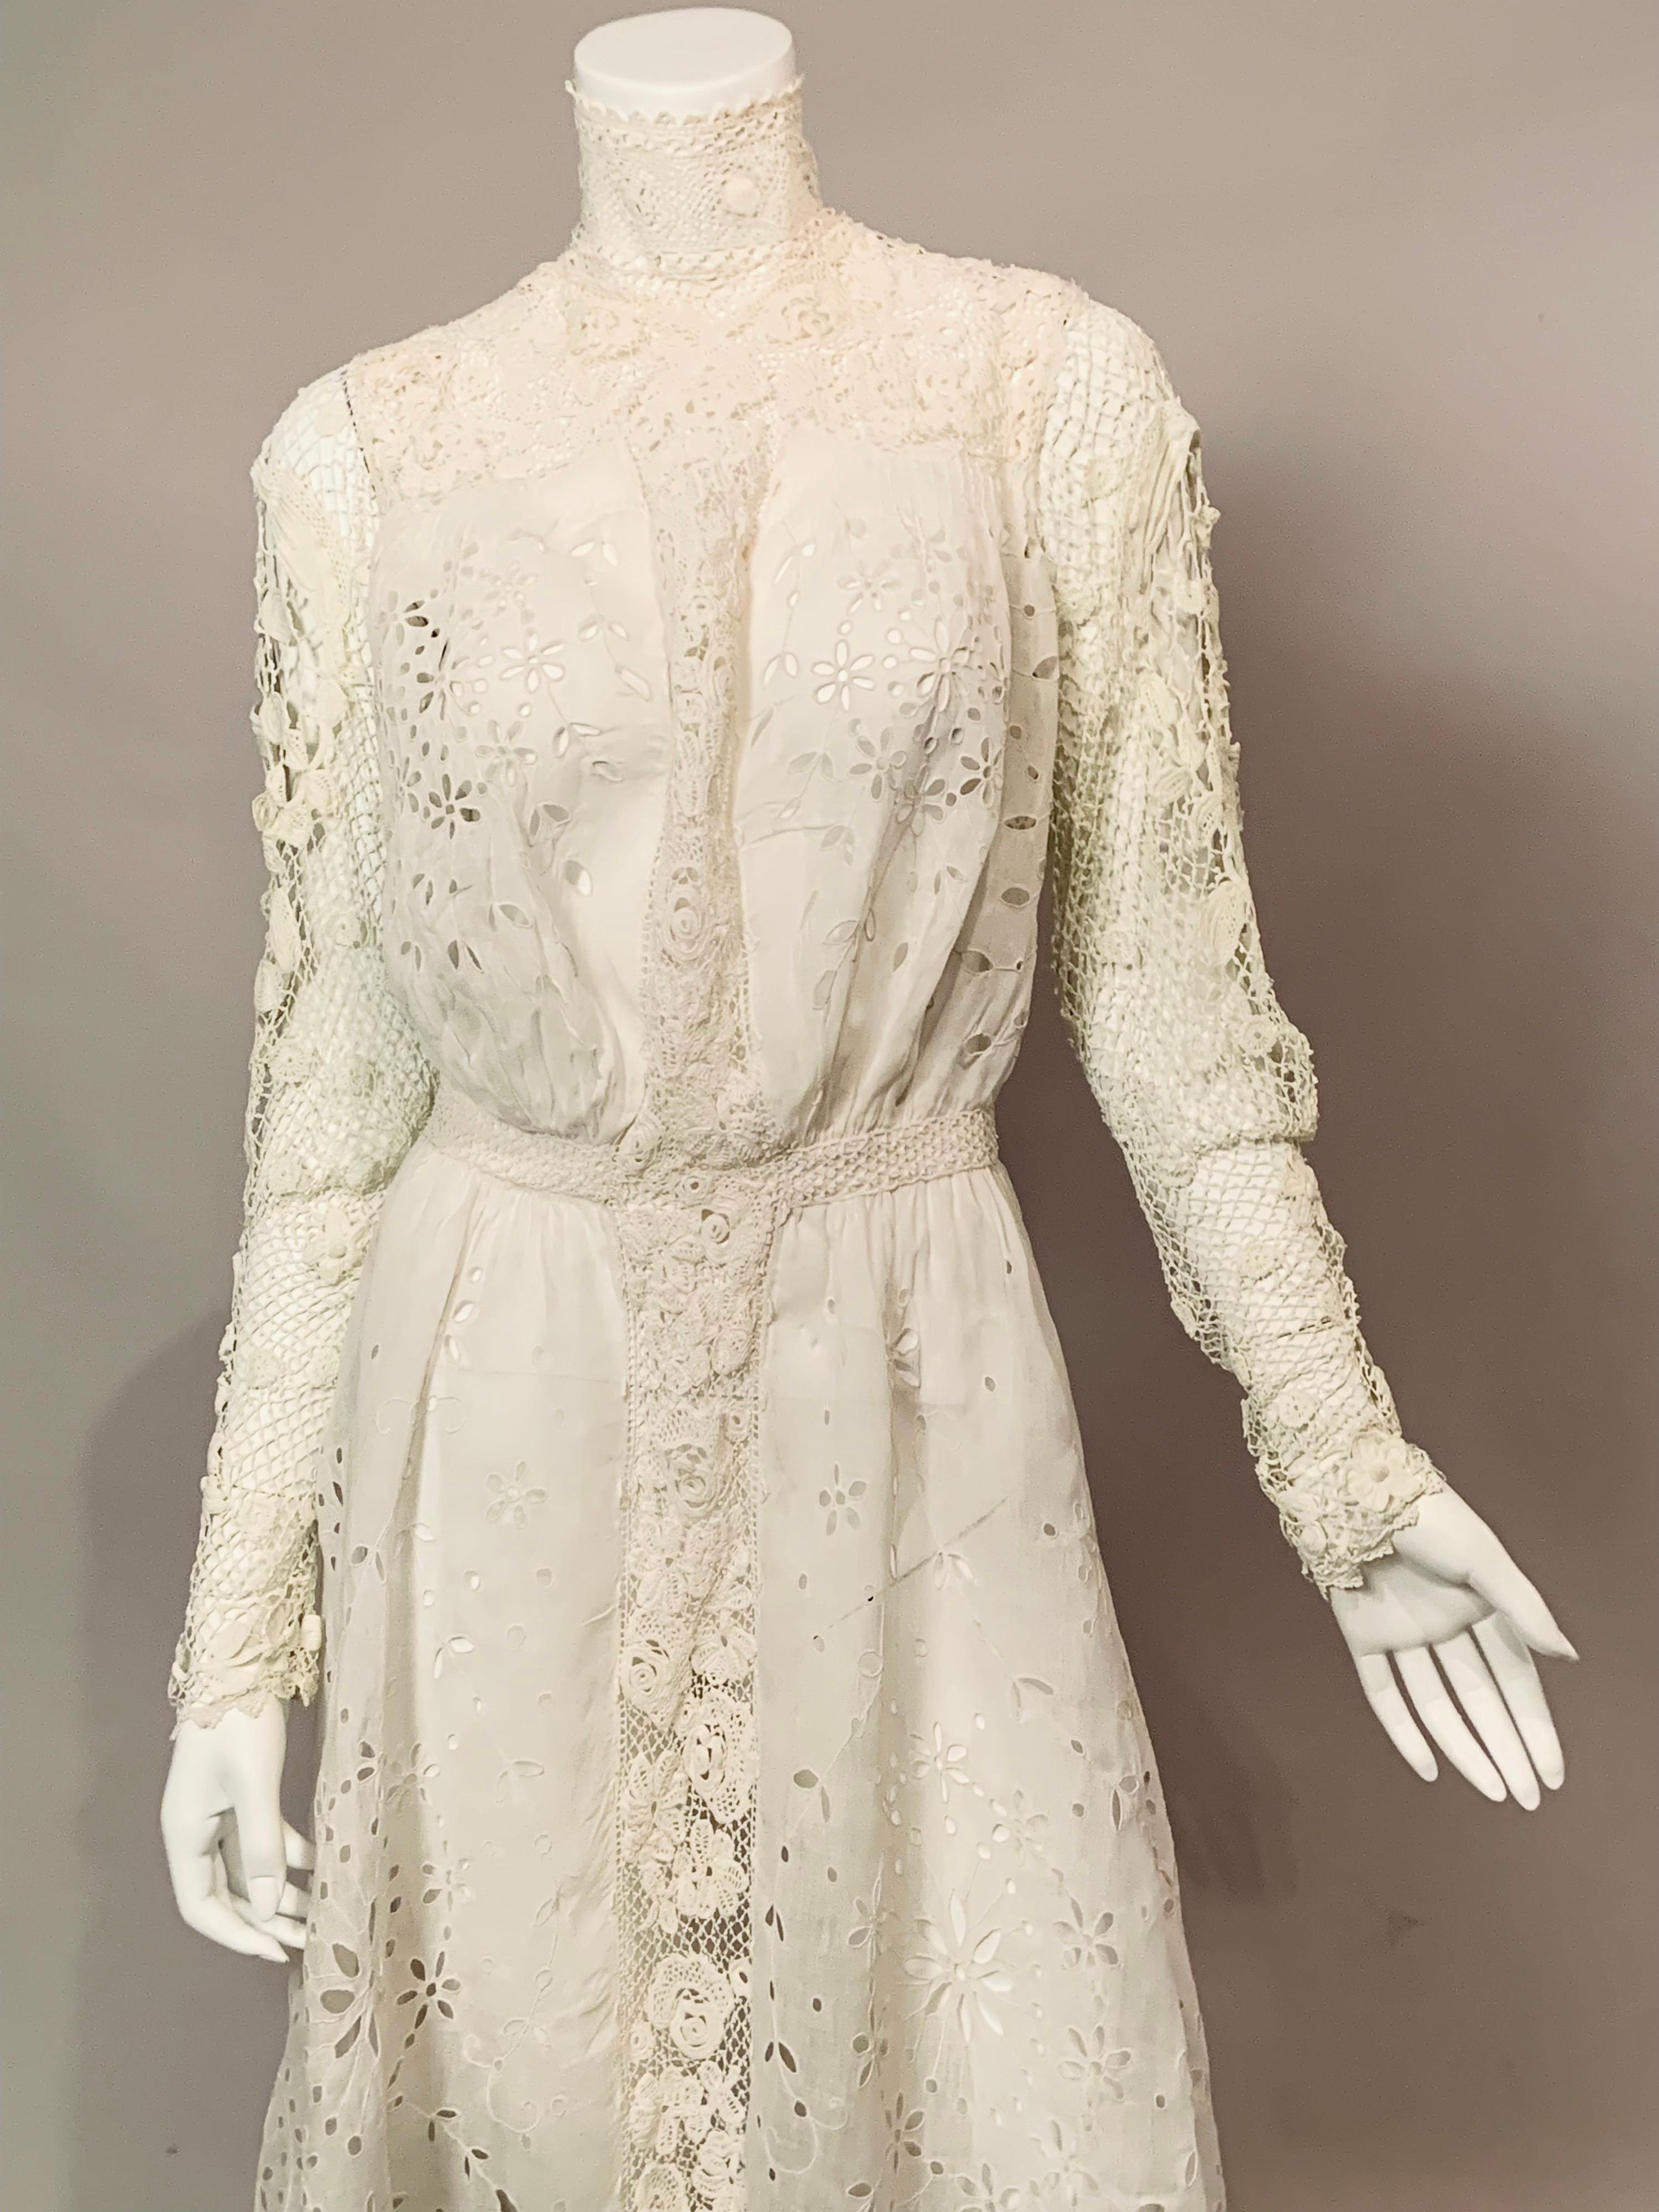 This charming Victorian dress is a combination of hand made Irish lace and hand embroidered cut work in a floral pattern on fine white handkerchief linen.  The high Irish lace collar was popular in the 1890's and this is combined with an Irish lace